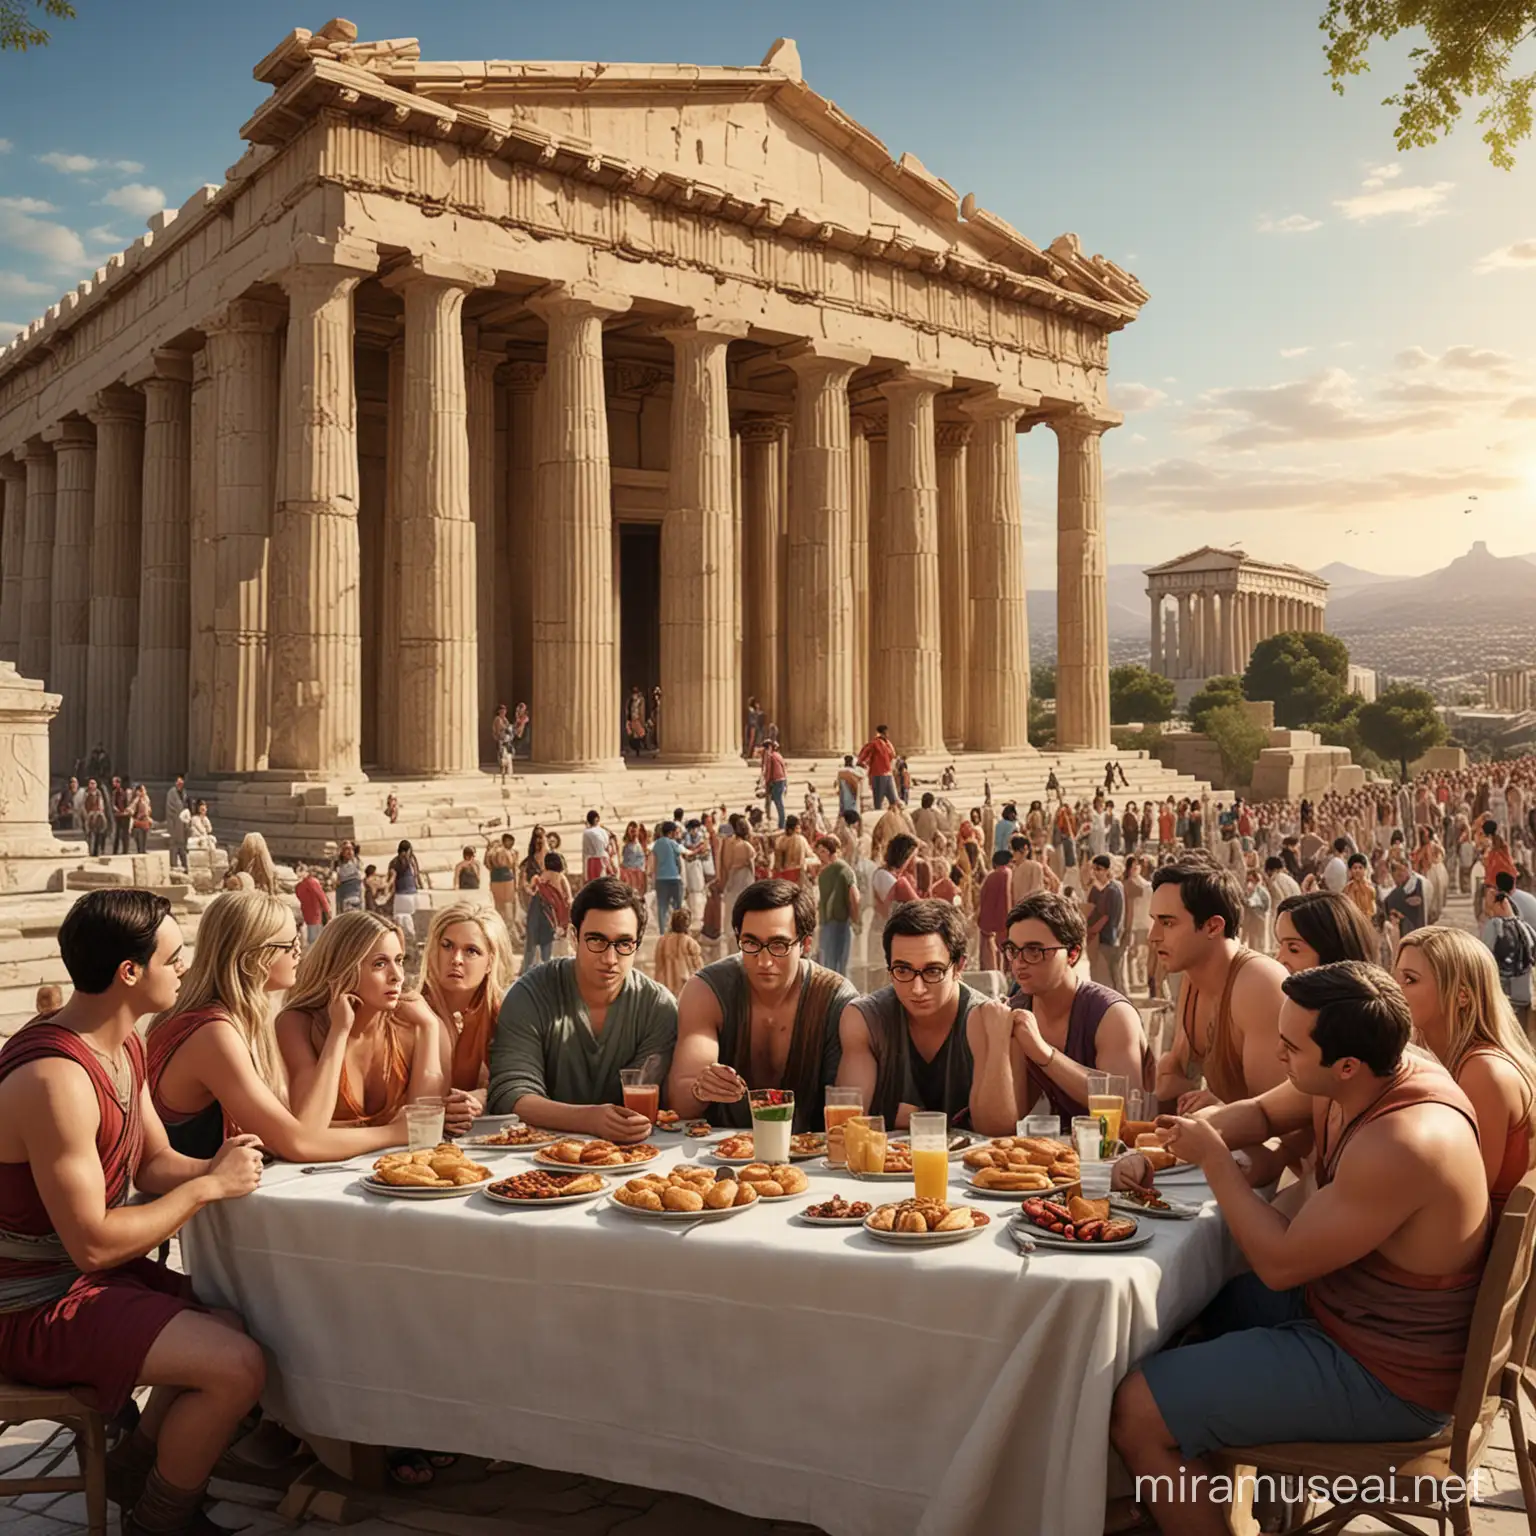 The Big Bang Theory Characters Enjoy Holy Supper with Parthenon Backdrop